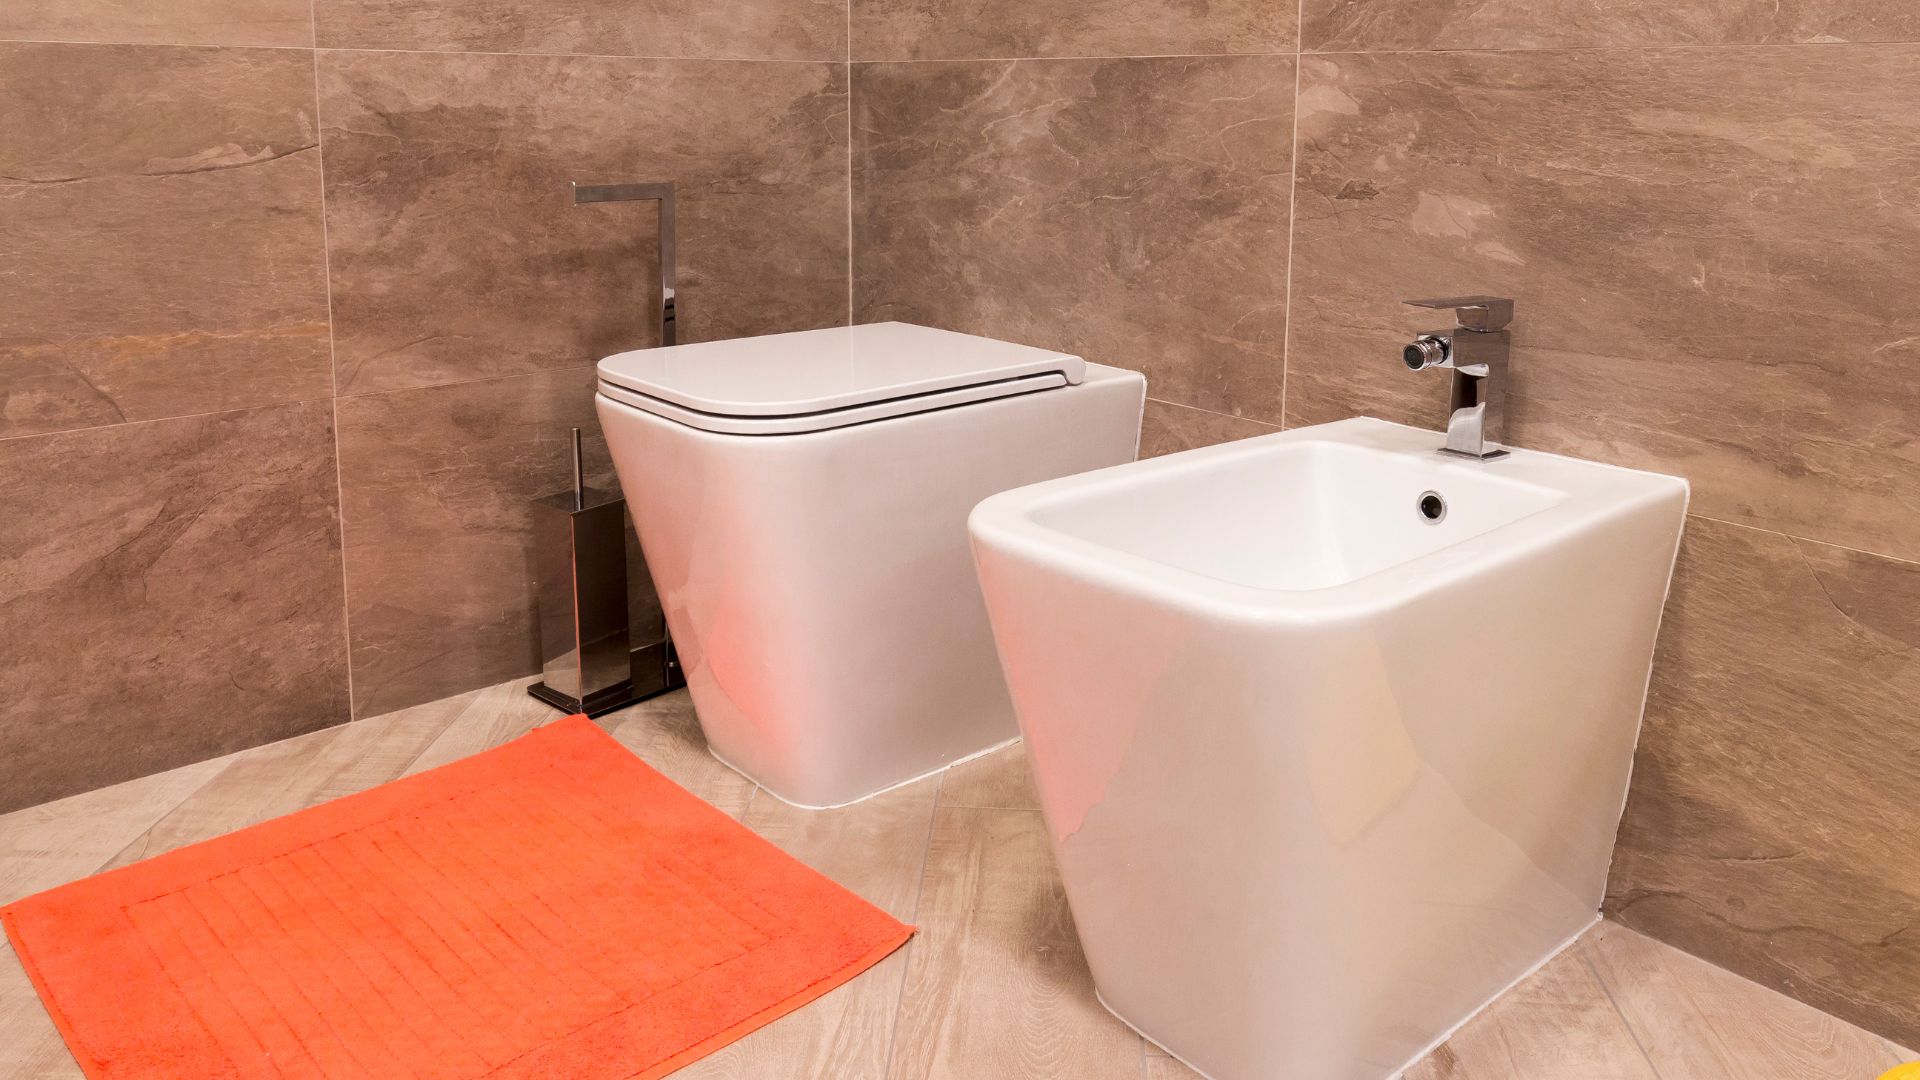 Improved Hygiene and Cleanliness with the Expertise of Plumbers